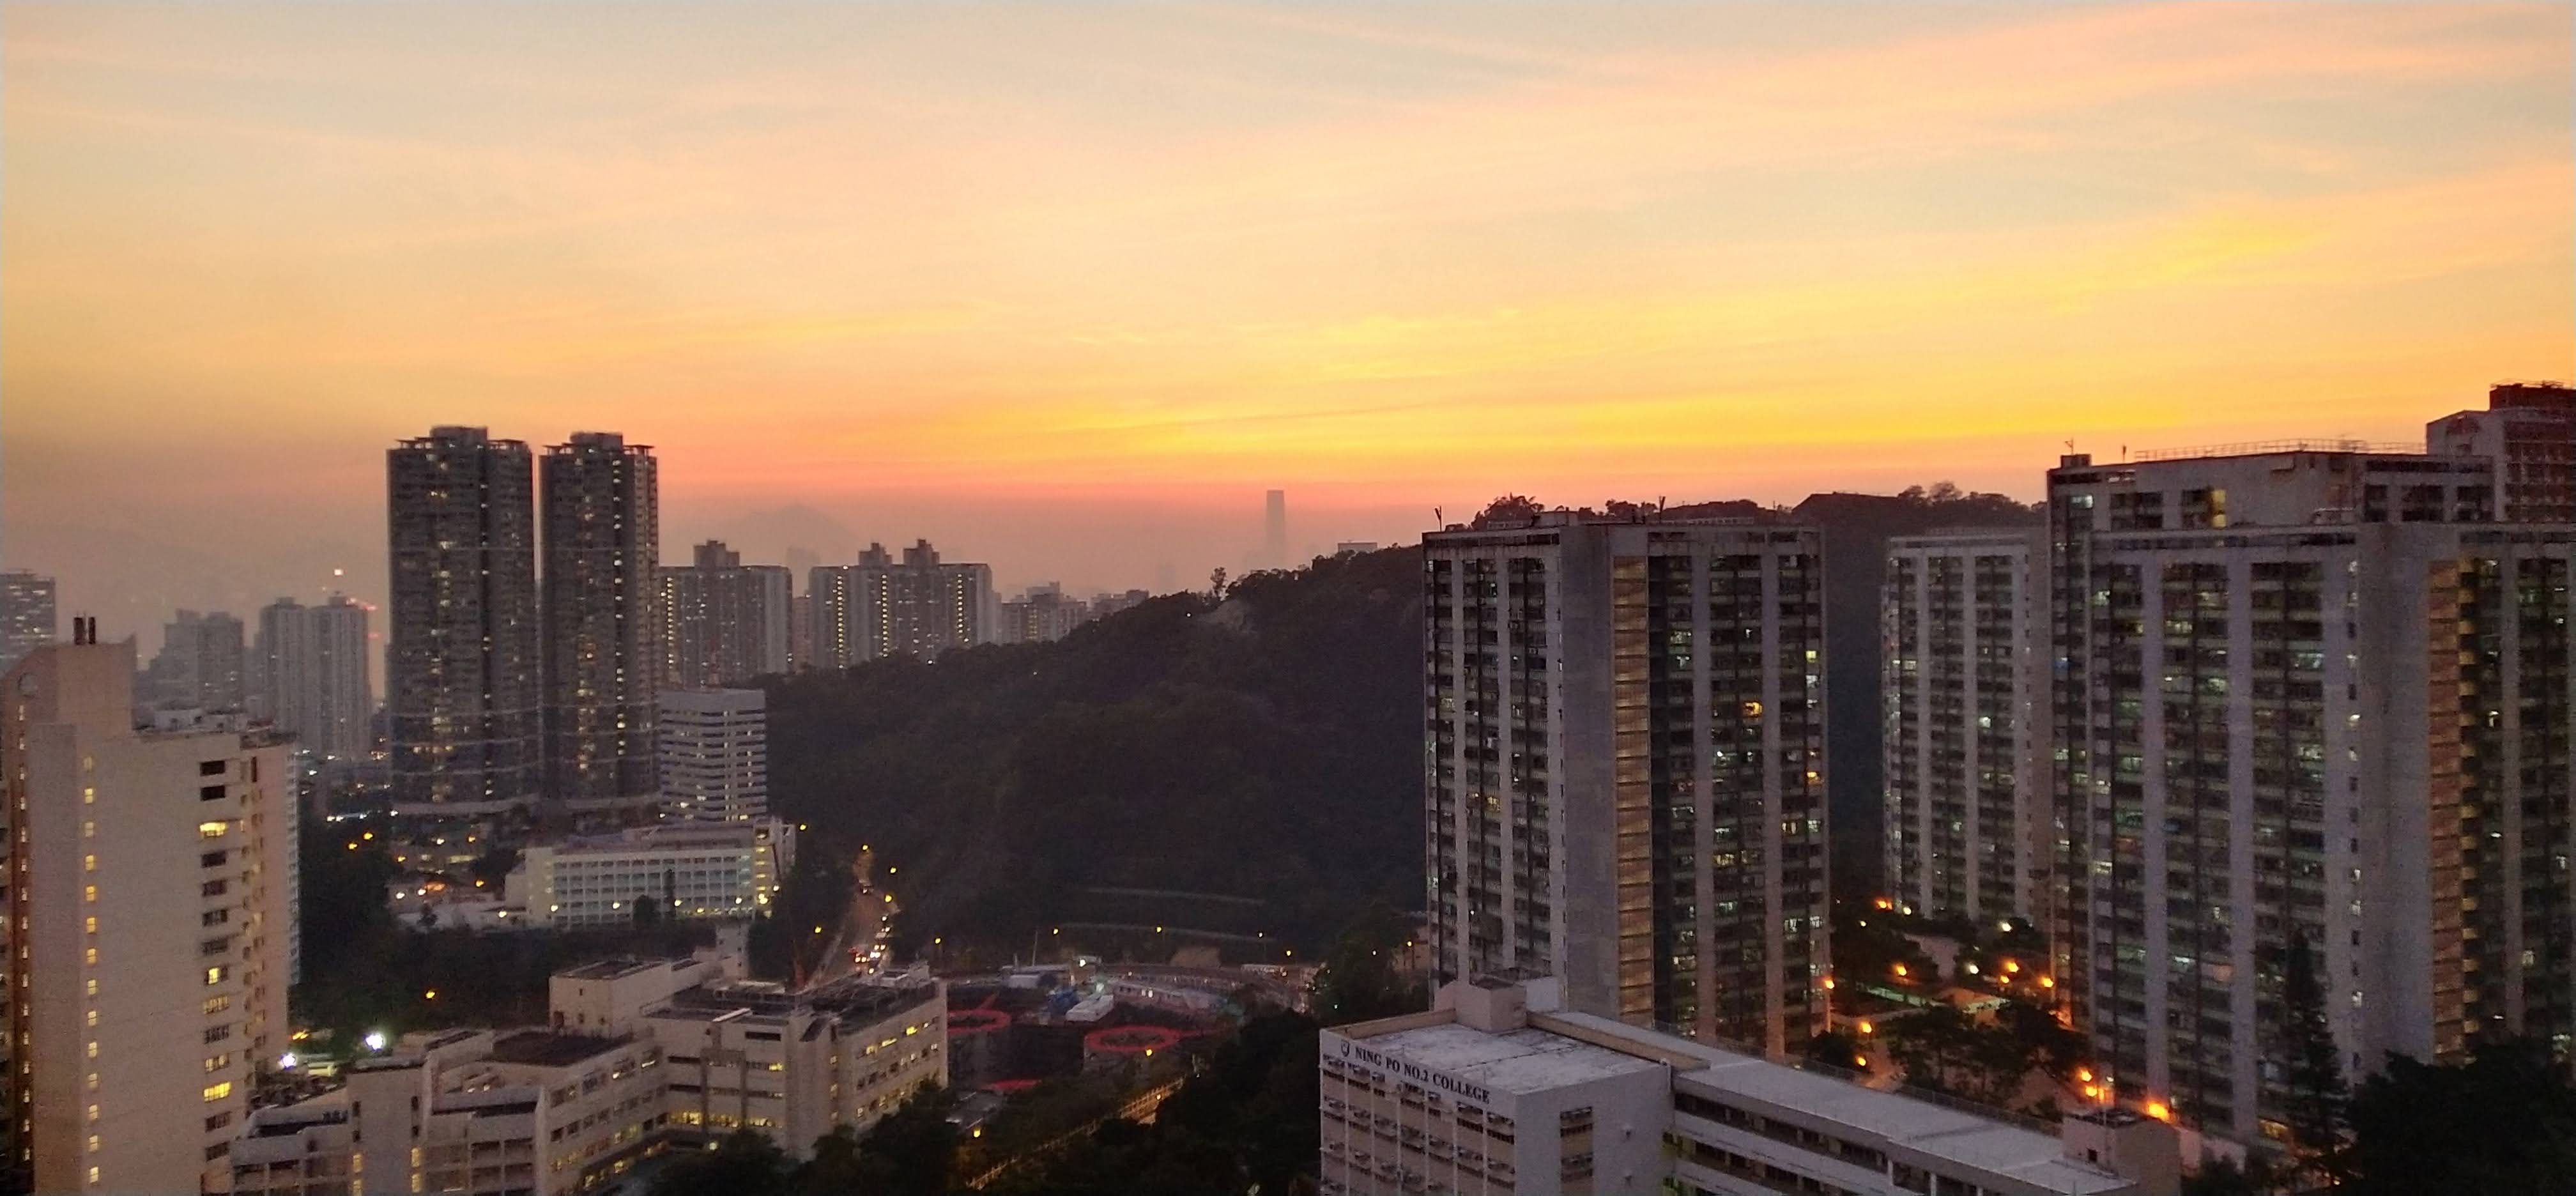 See the compact cityscape of Kowloon from On Tai Estate.